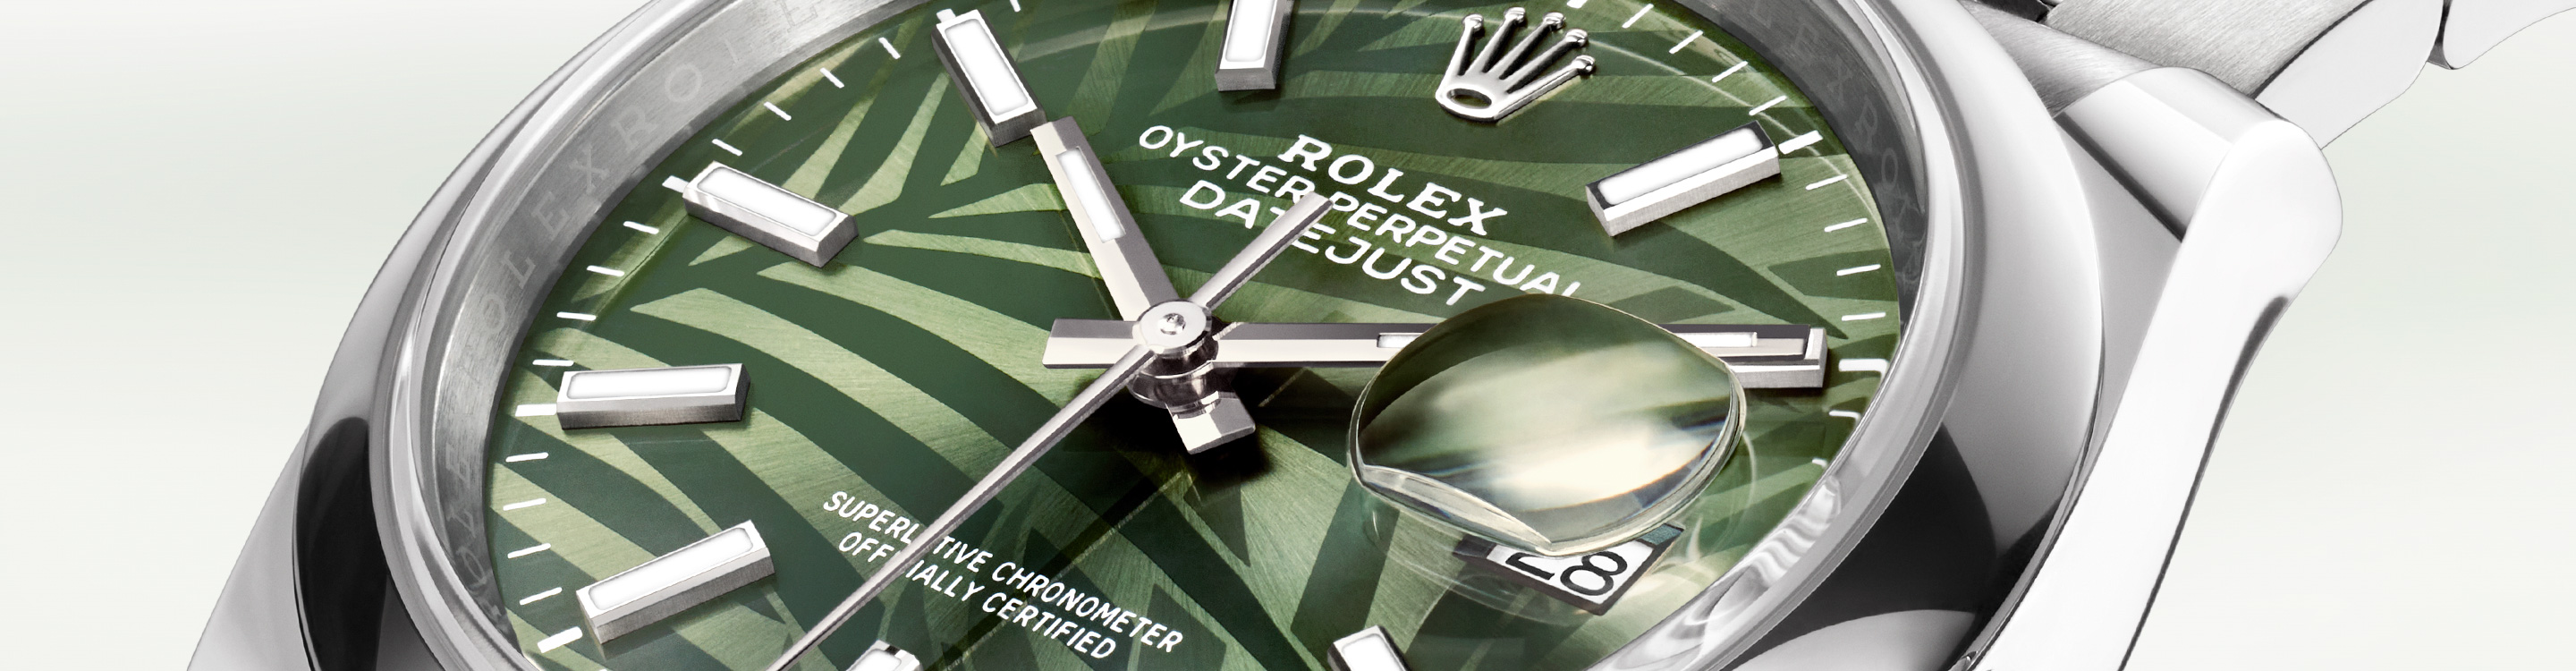 Dial Rolex watch Oyster Perpetual in Grassy